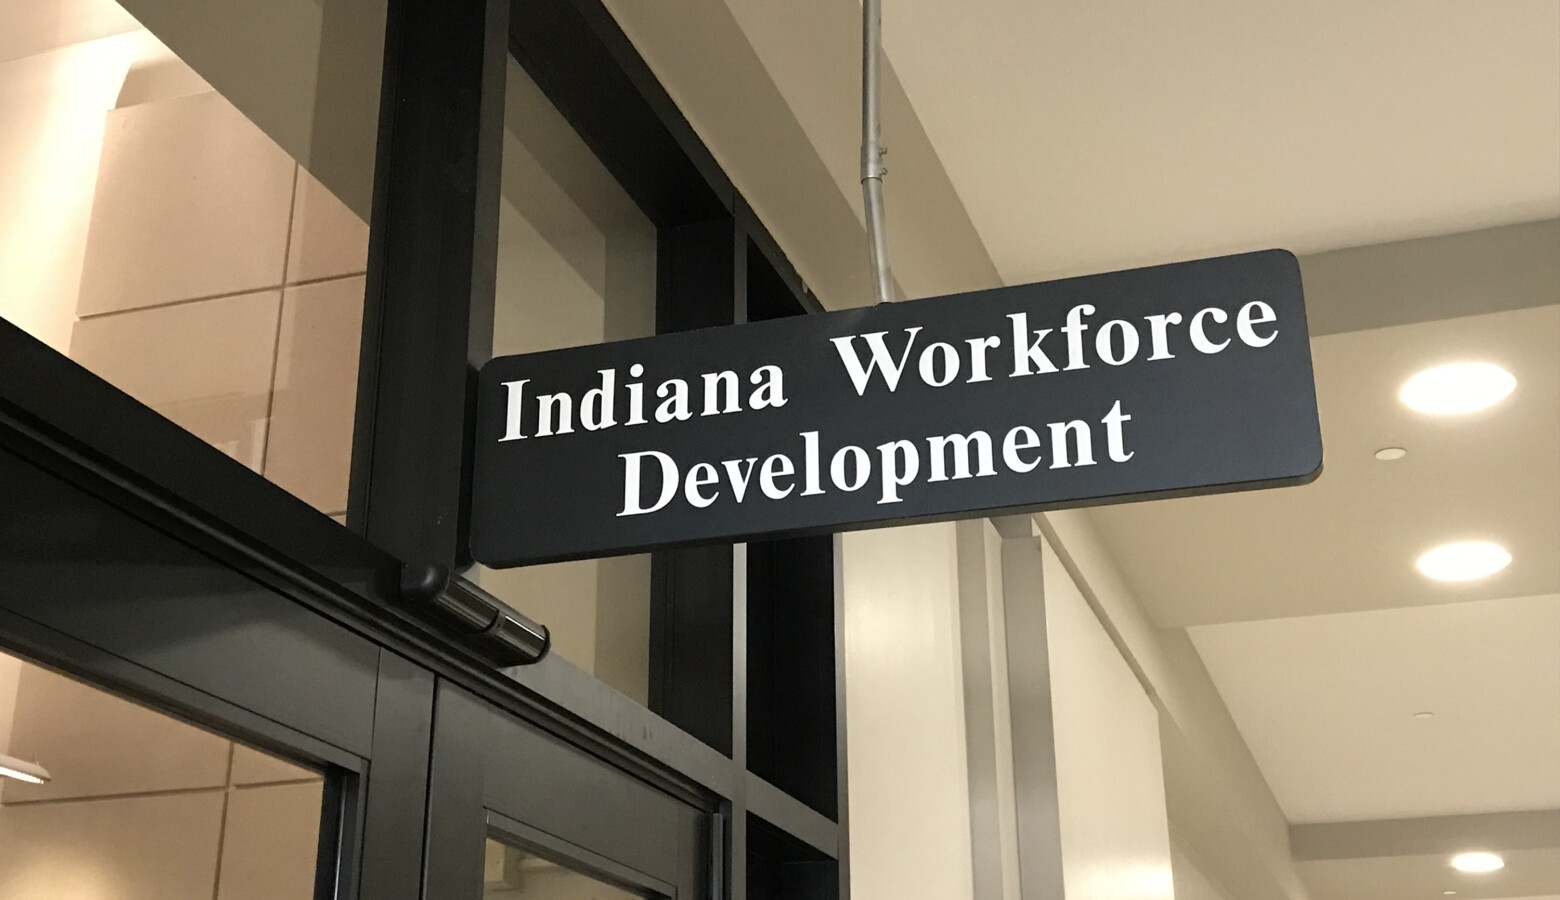 Department of Workforce Development Commissioner Fred Payne urges people who have questions to visit the state’s website – unemployment.in.gov. (Brandon Smith/IPB News)